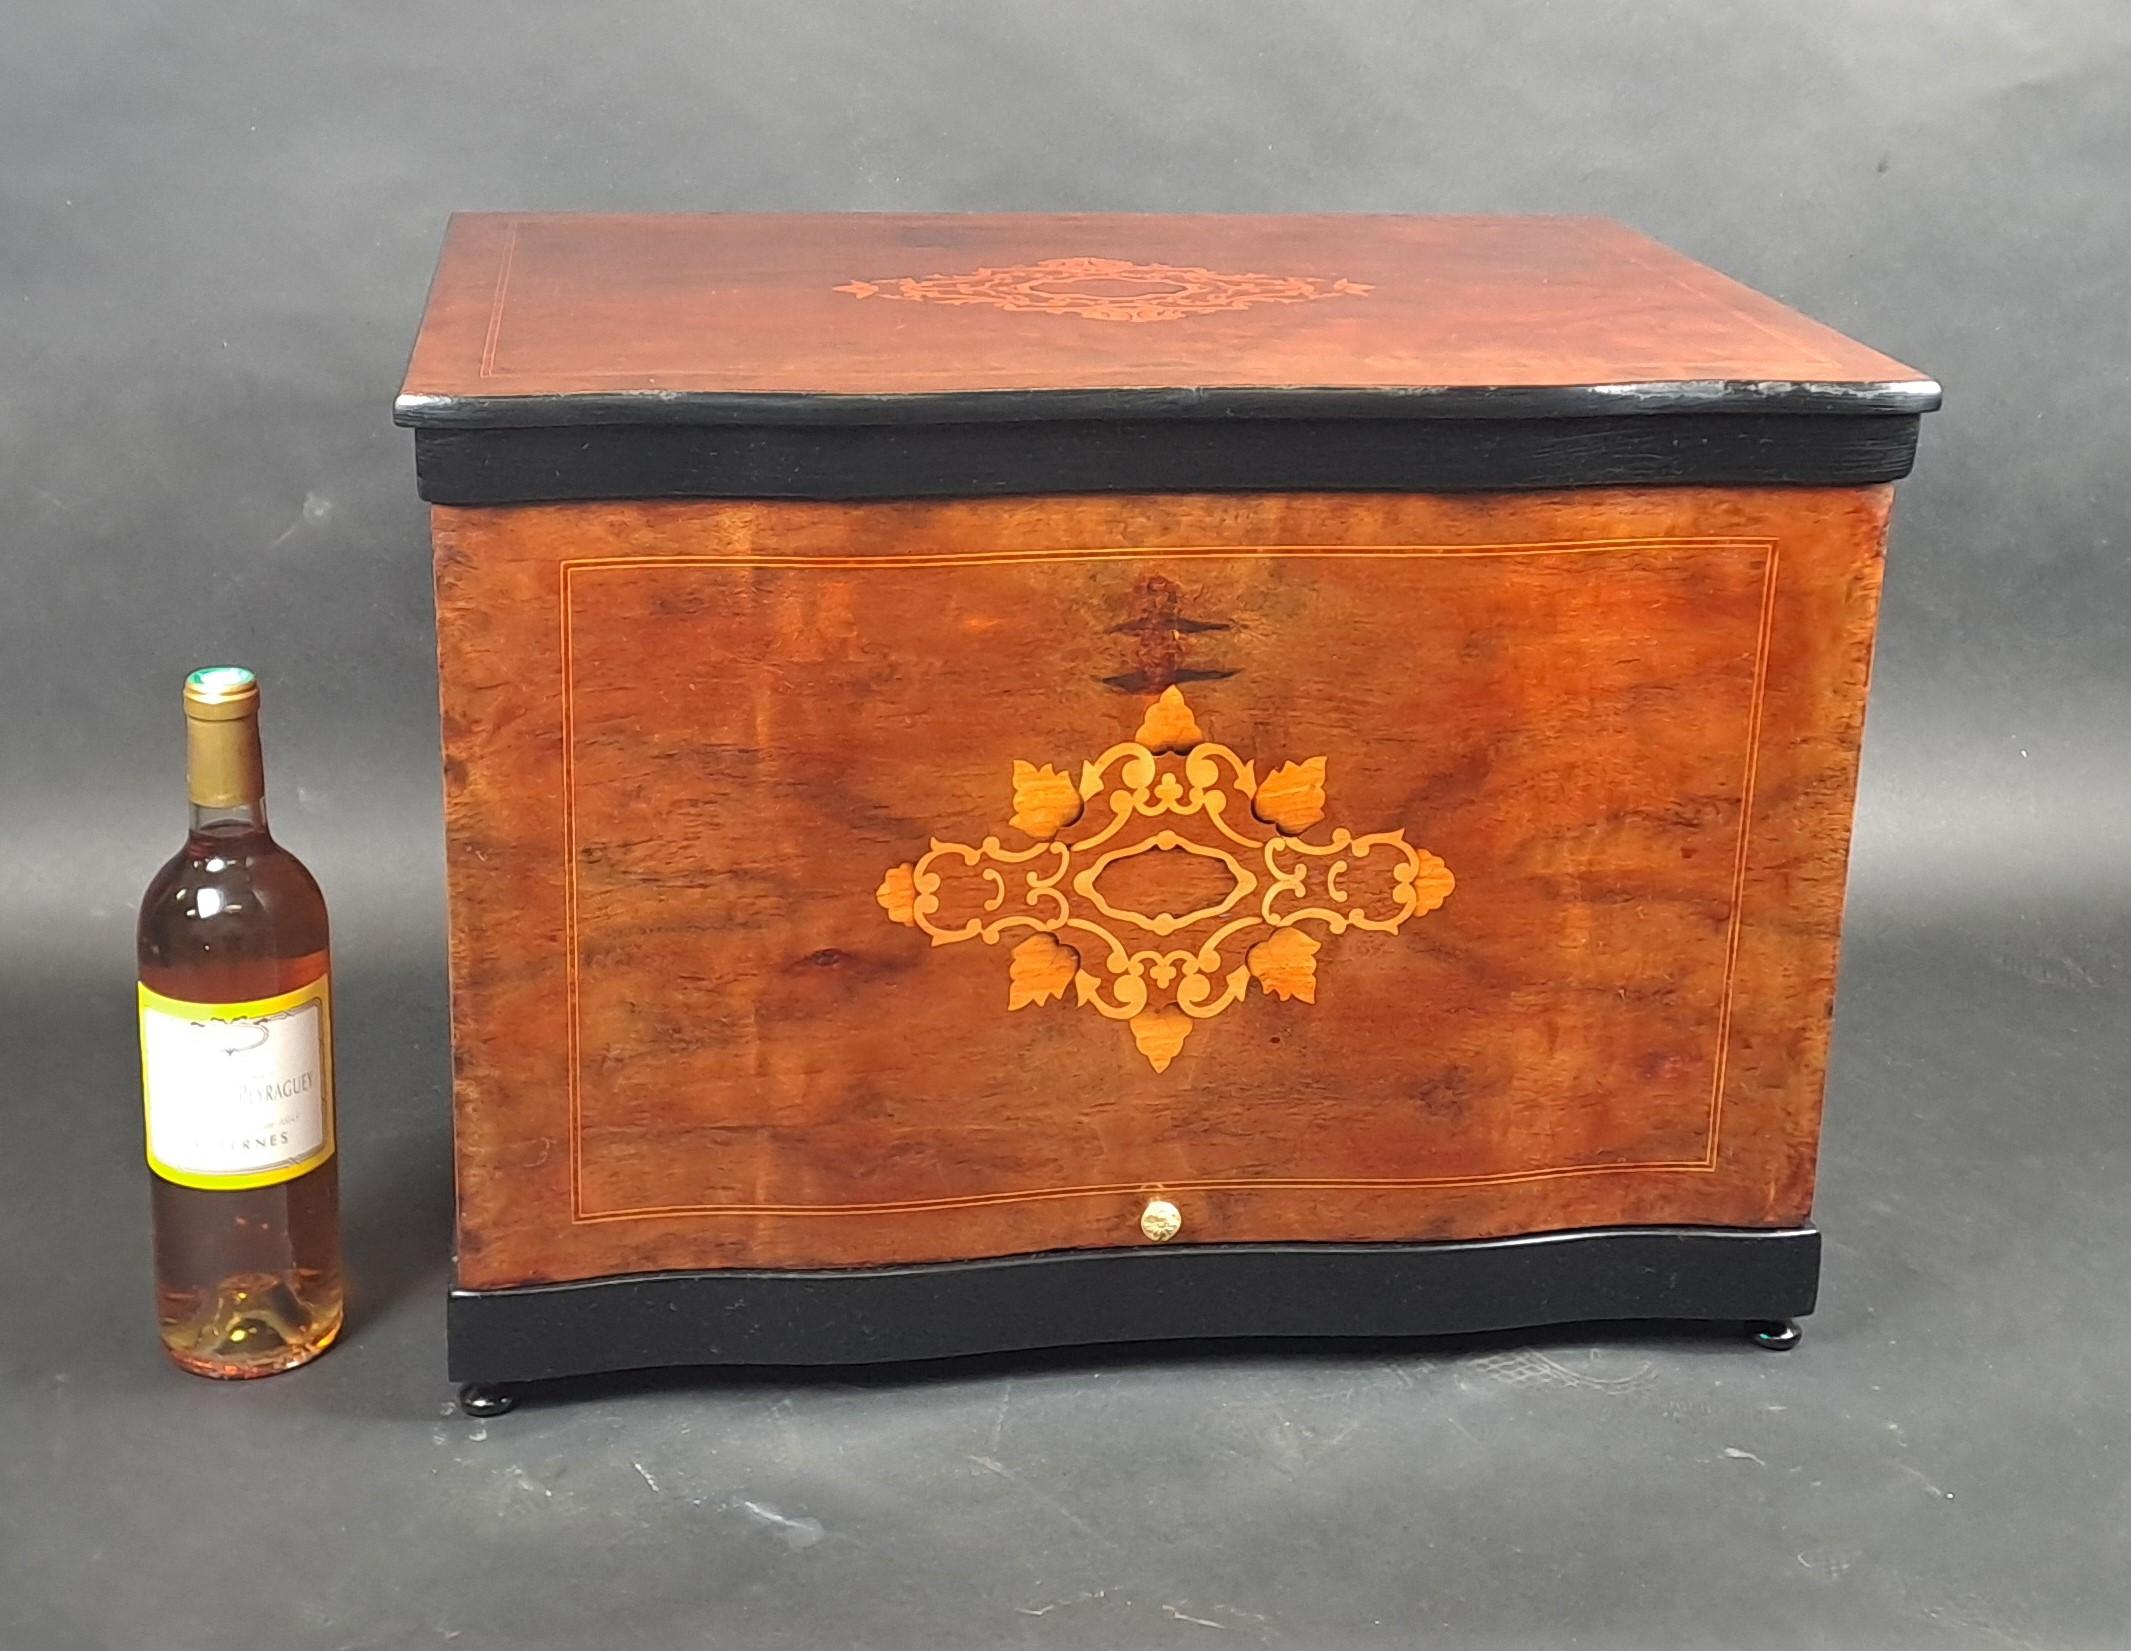 Rare marquetry cocktail bar with Charles X-inspired motifs or Victorian-style opening onto an interior with spaces for seven glasses, a shaker, two carafes, a mixing spoon holder, two coasters and a top.

Work around 1900 probably English.

Very